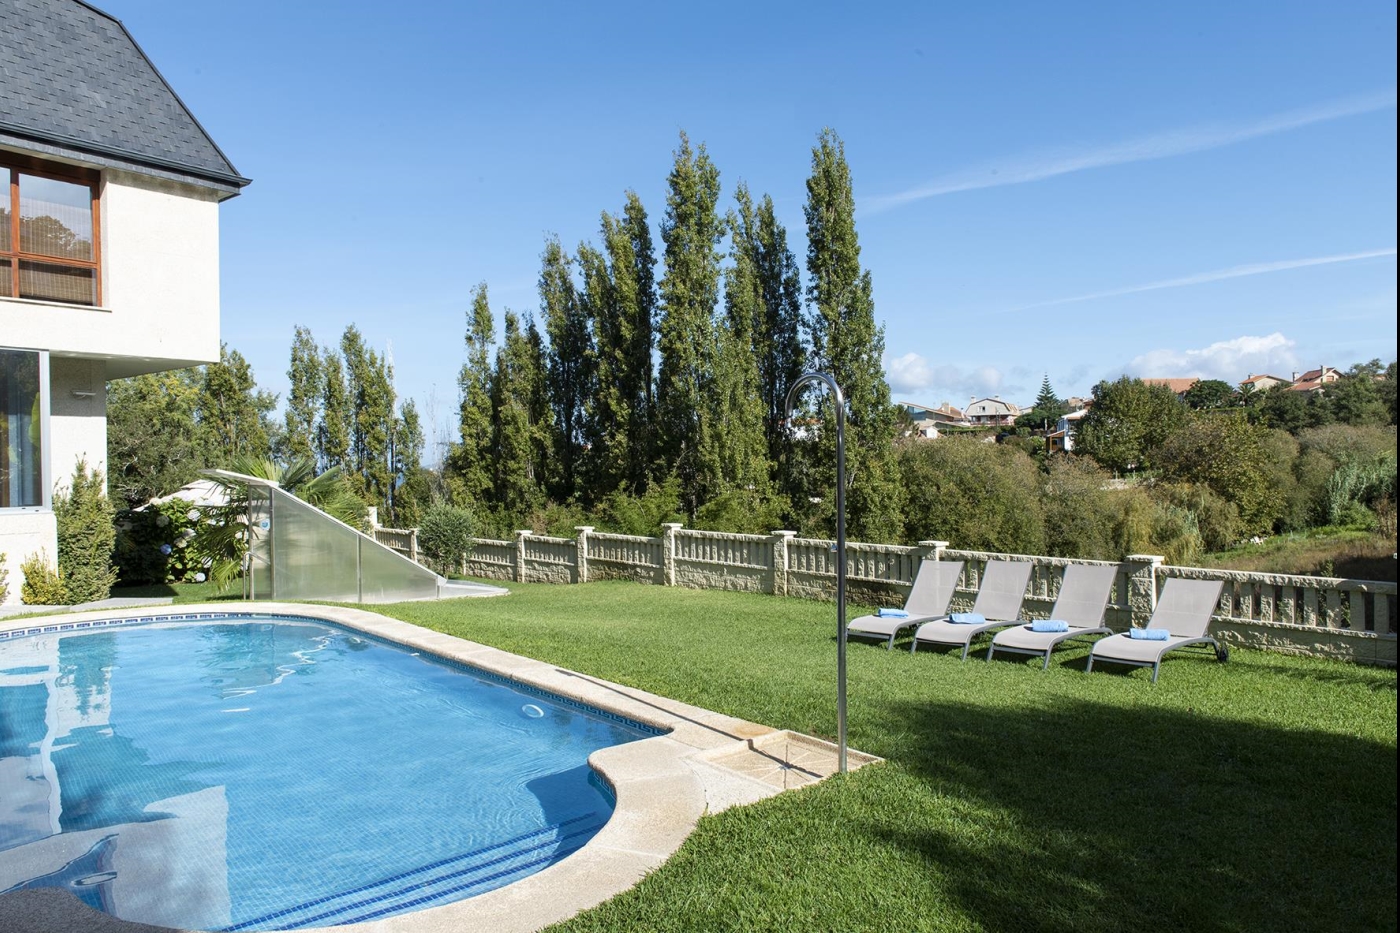 Villa with Pool. Privacy one step away from the Beach in Vigo